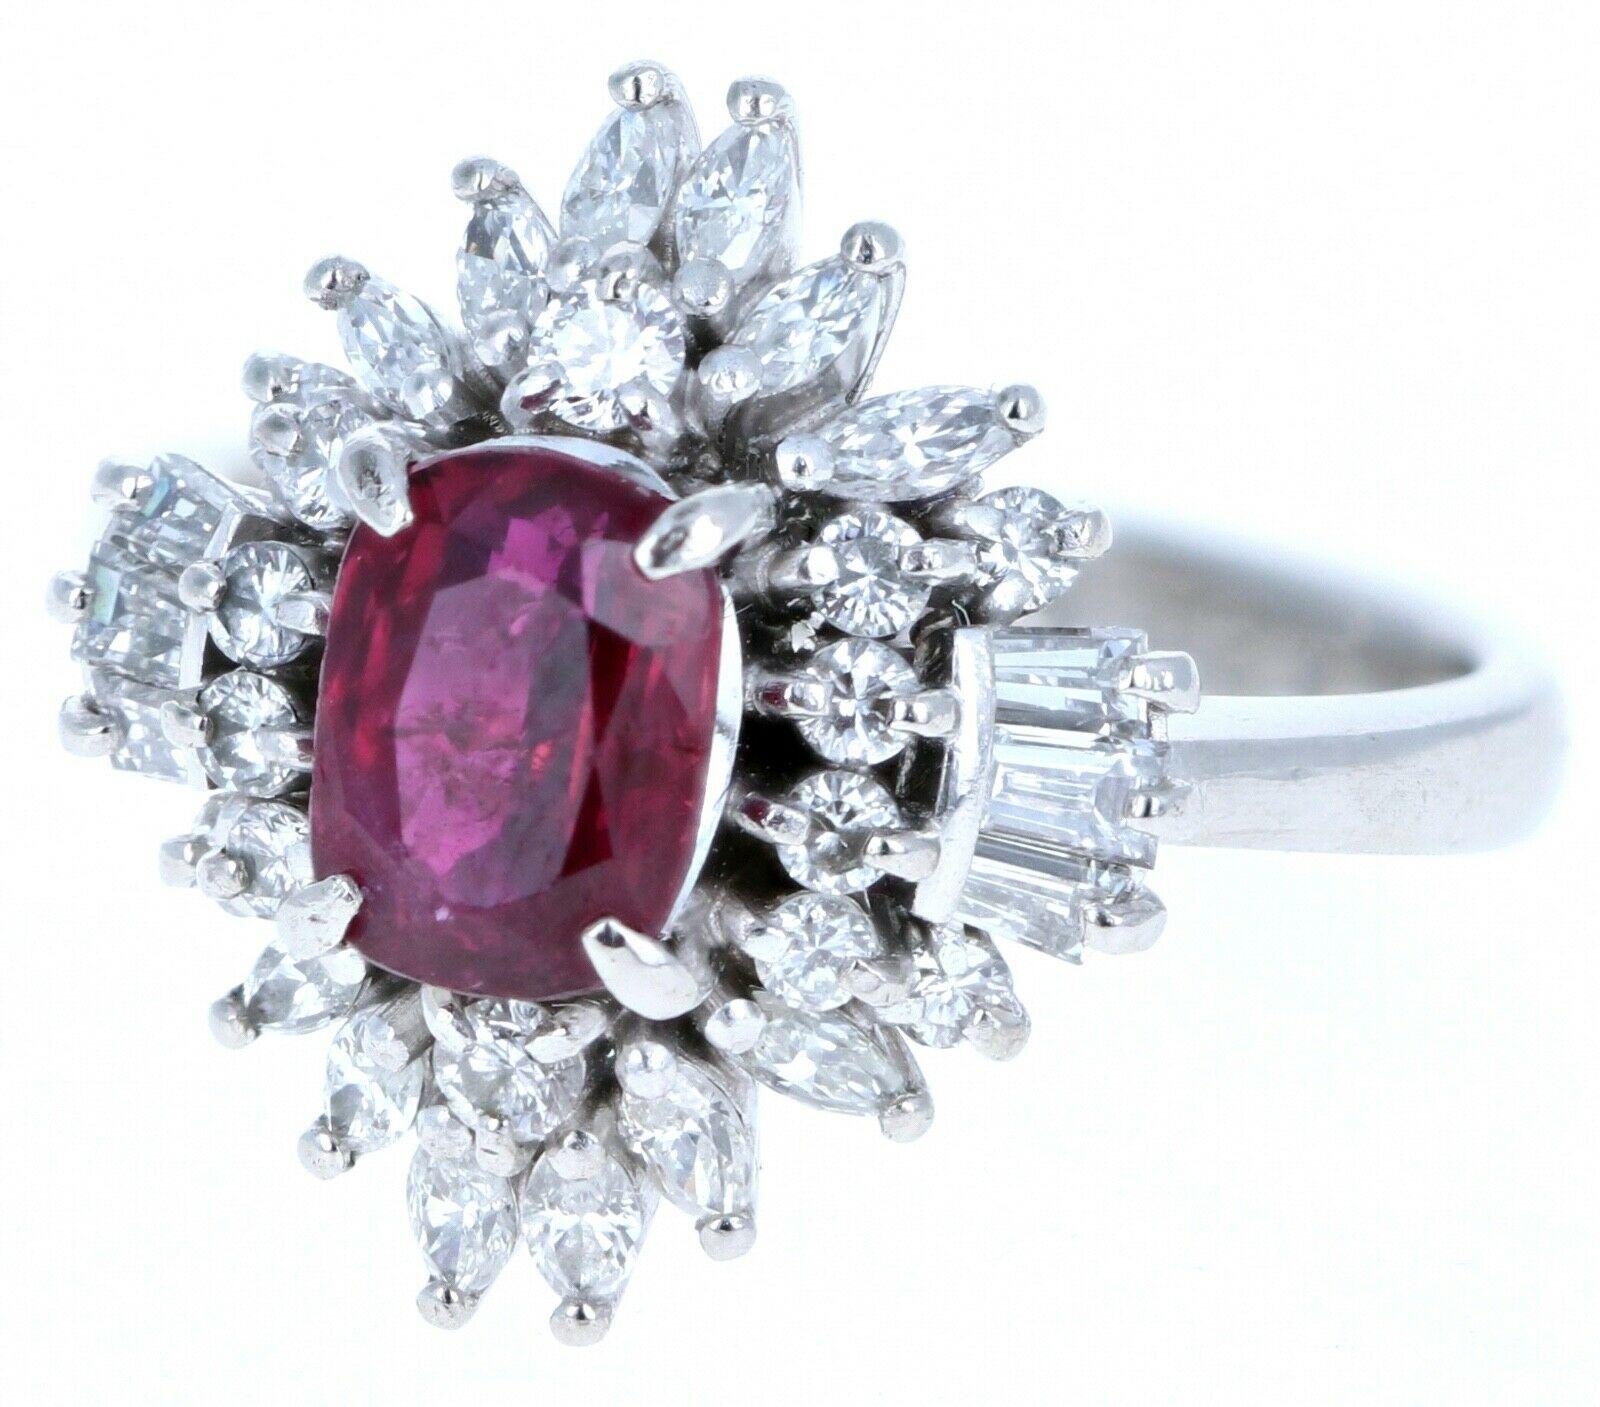  Beautiful ruby & diamond ring 

Very elegant for everyday wear !! No heat ruby!

Approx 0.84 ctw of g-h vs diamonds 

Ruby approx. 1.43 ctw



Size 4.25

Weight 8.2 grams